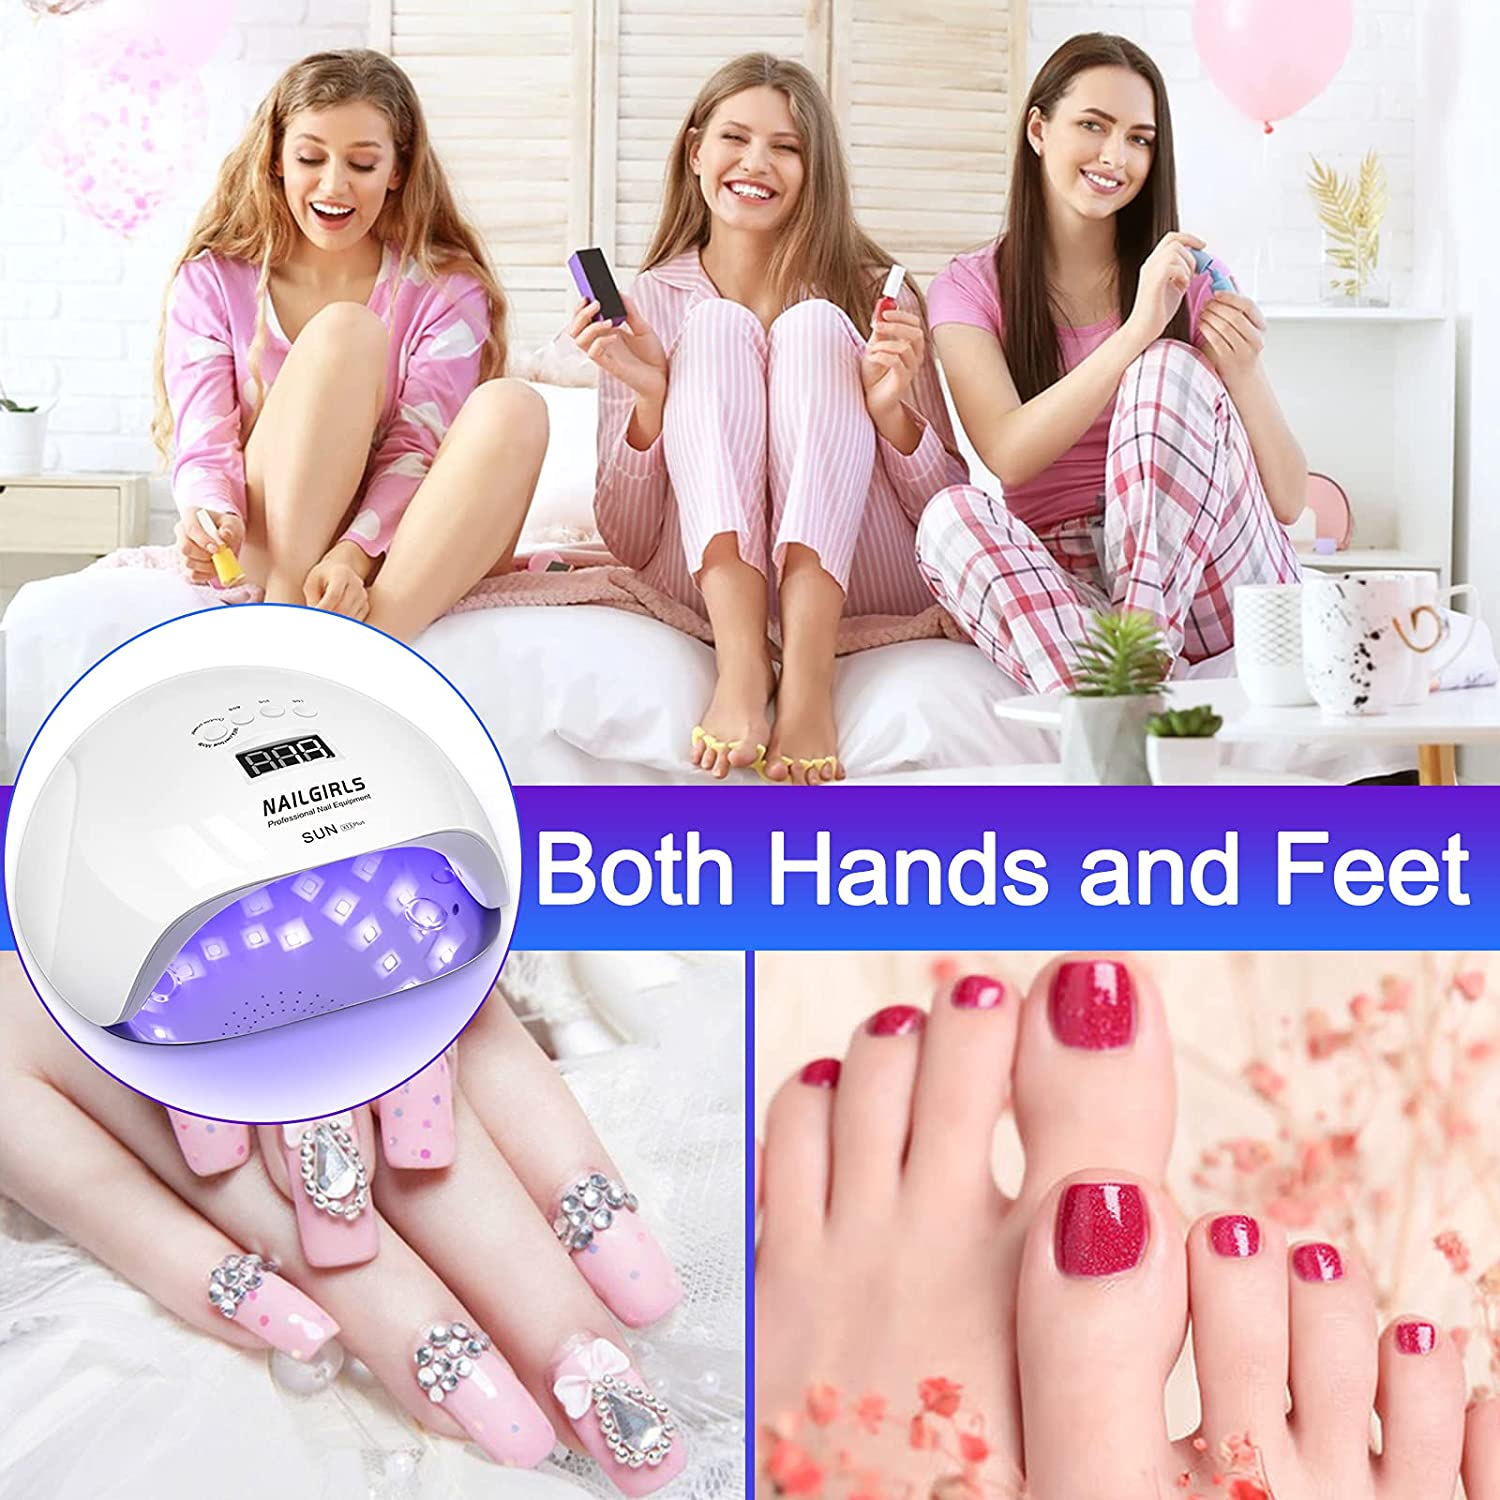 Professional Nail Polish Dryer Machine With USB | Nail Polish Dryer | LED UV  Light Nail Polish Dryer Curing Lamp Light Portable | Lamp cures fingernails  or toenails | Nails Paints Dryer Machine... ( Multi Color)